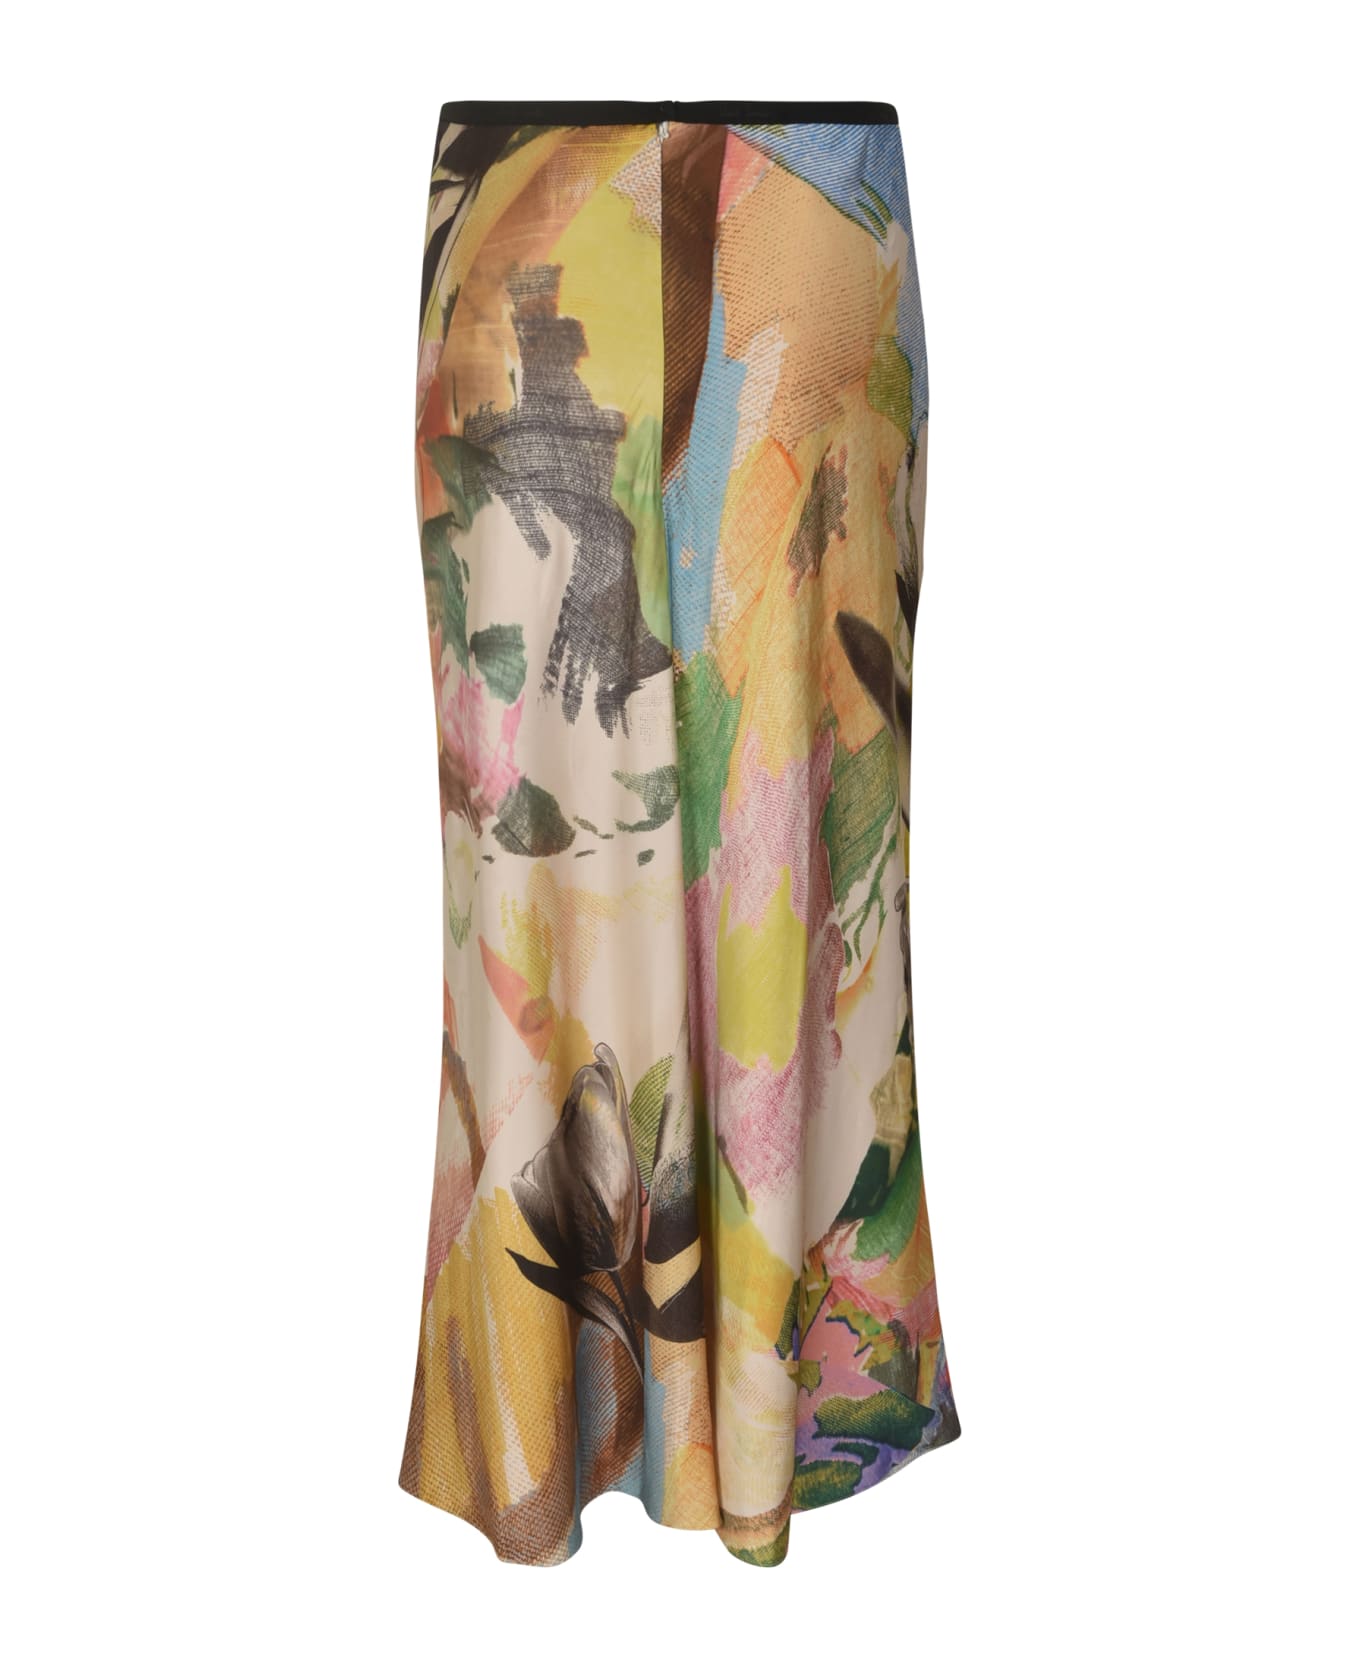 Paul Smith Floral Printed Skirt - Multicolor